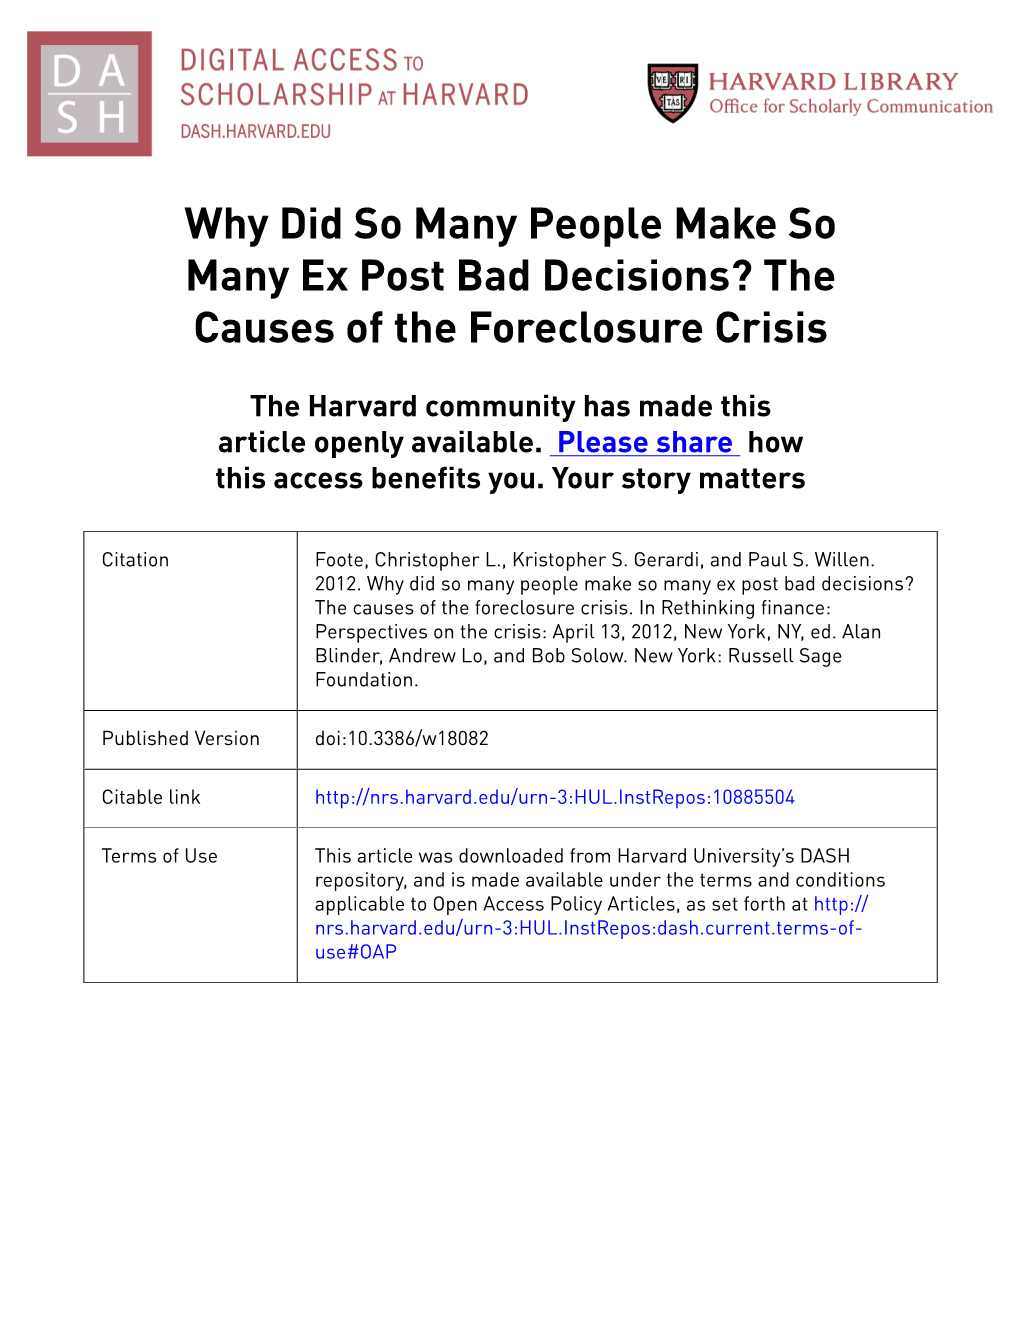 Why Did So Many People Make So Many Ex Post Bad Decisions? the Causes of the Foreclosure Crisis